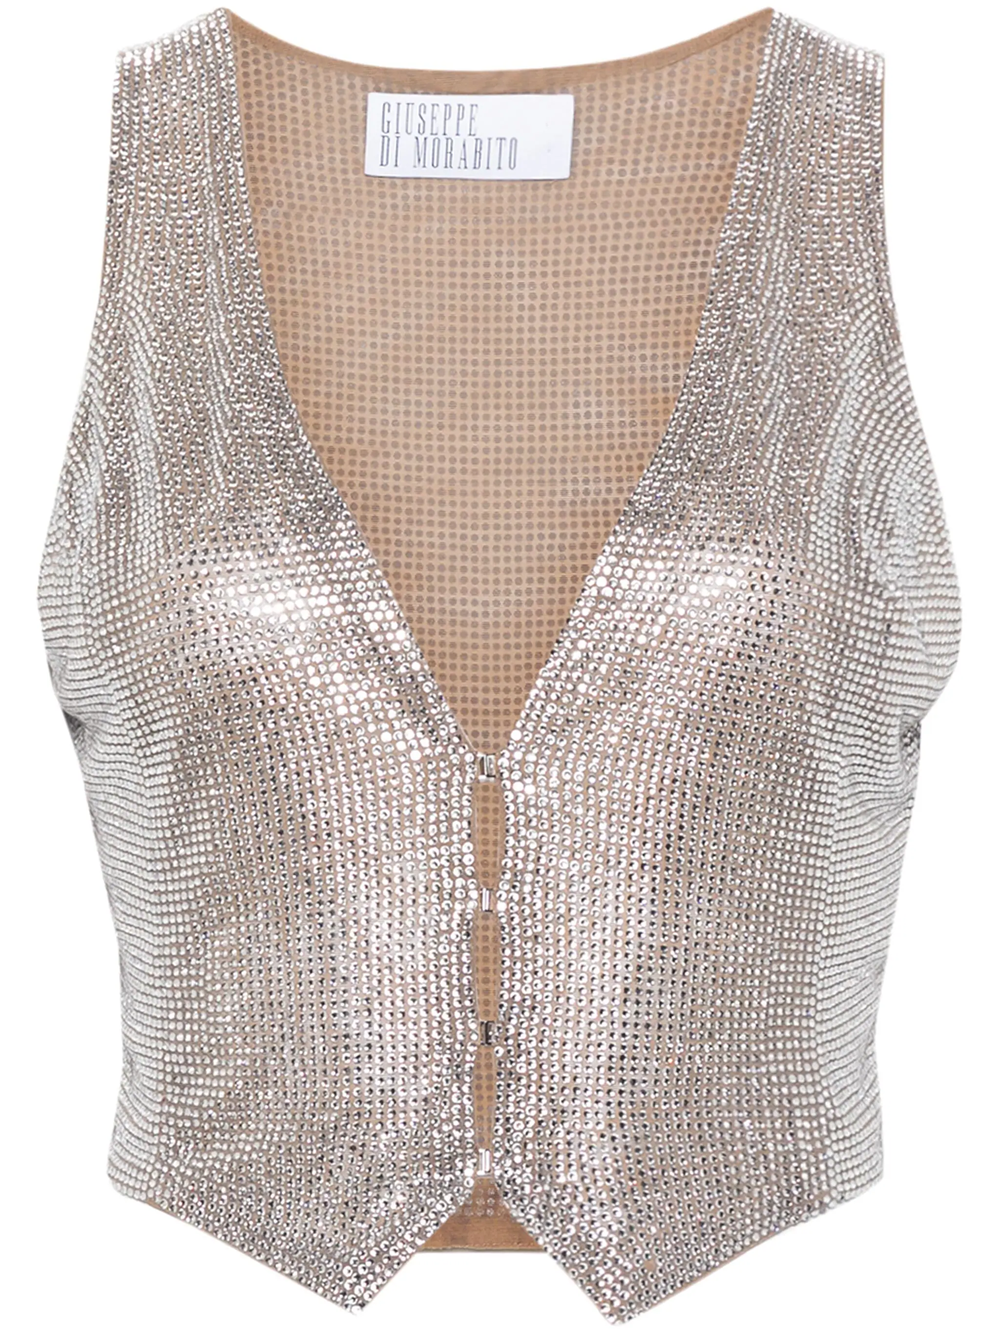 GIUSEPPE DI MORABITO SHORT VEST EMBELLISHED WITH CRYSTALS